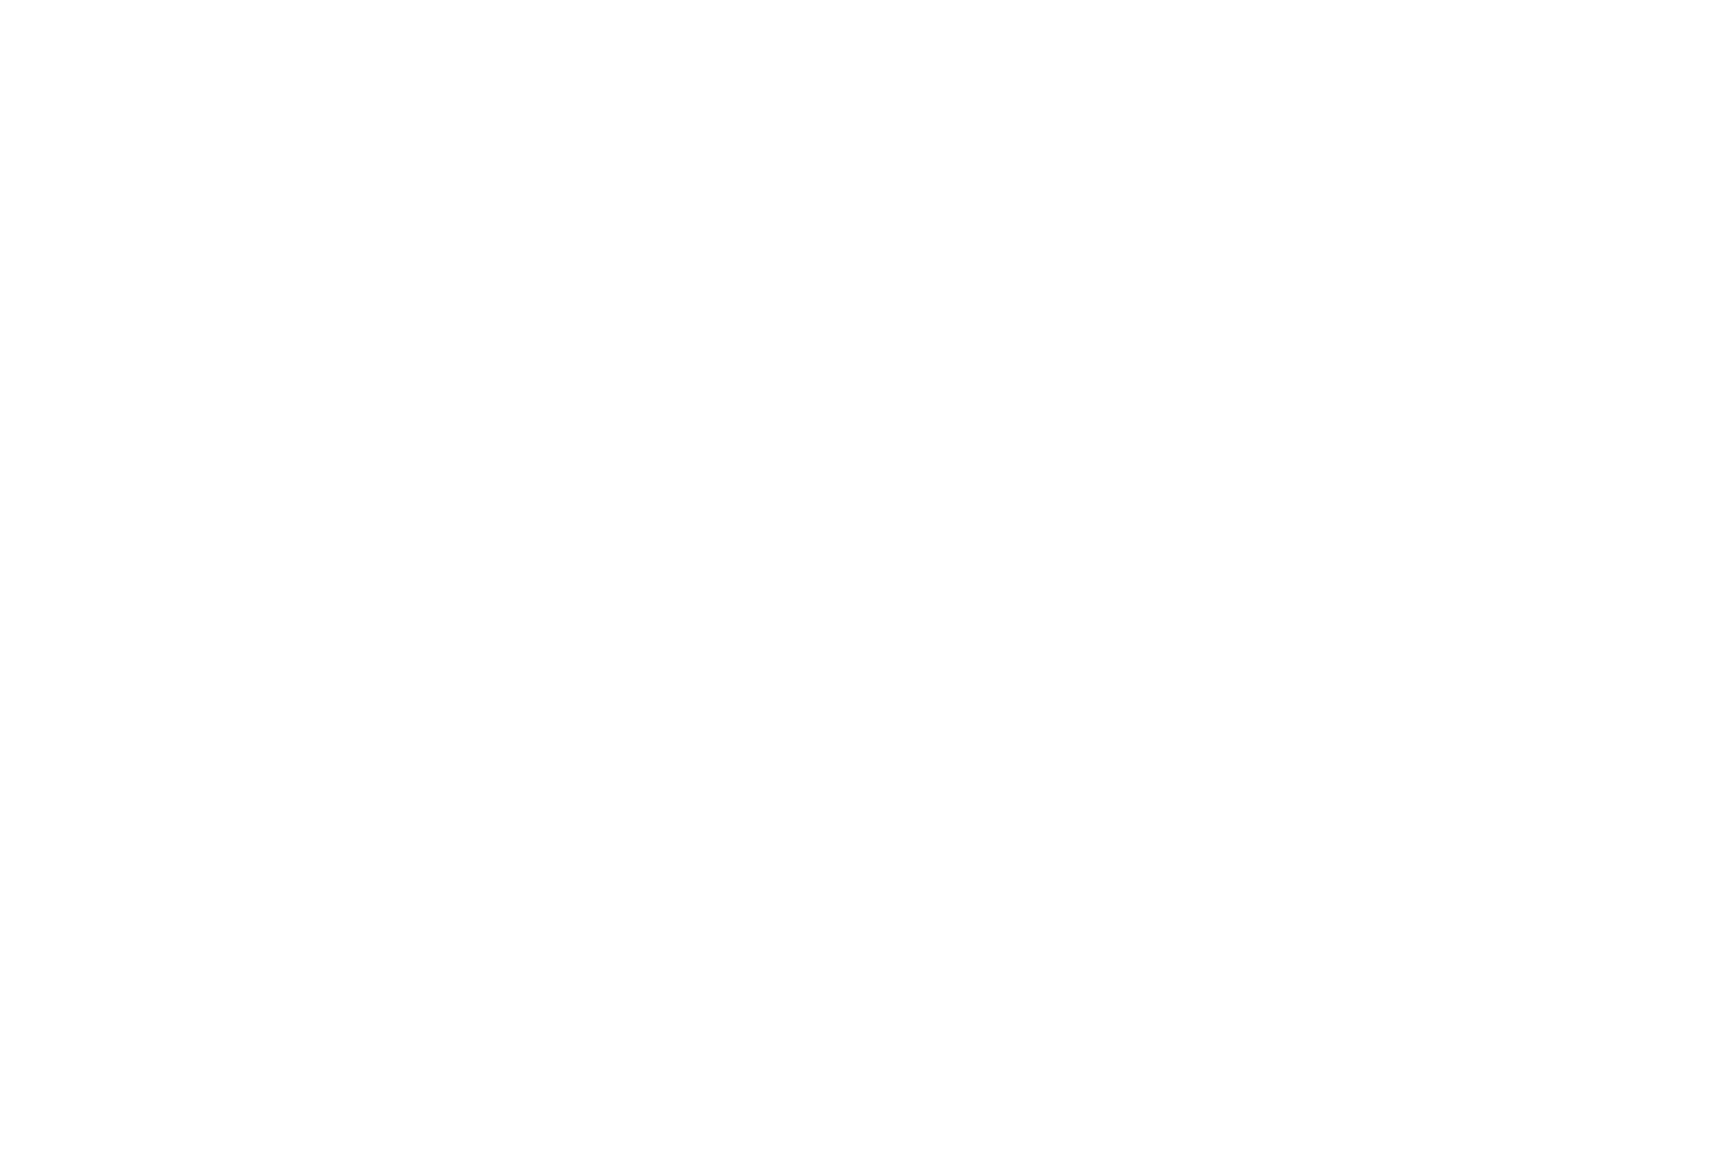 OFFICIAL SELECTION - FLICKFAIR - 2021 (1).png